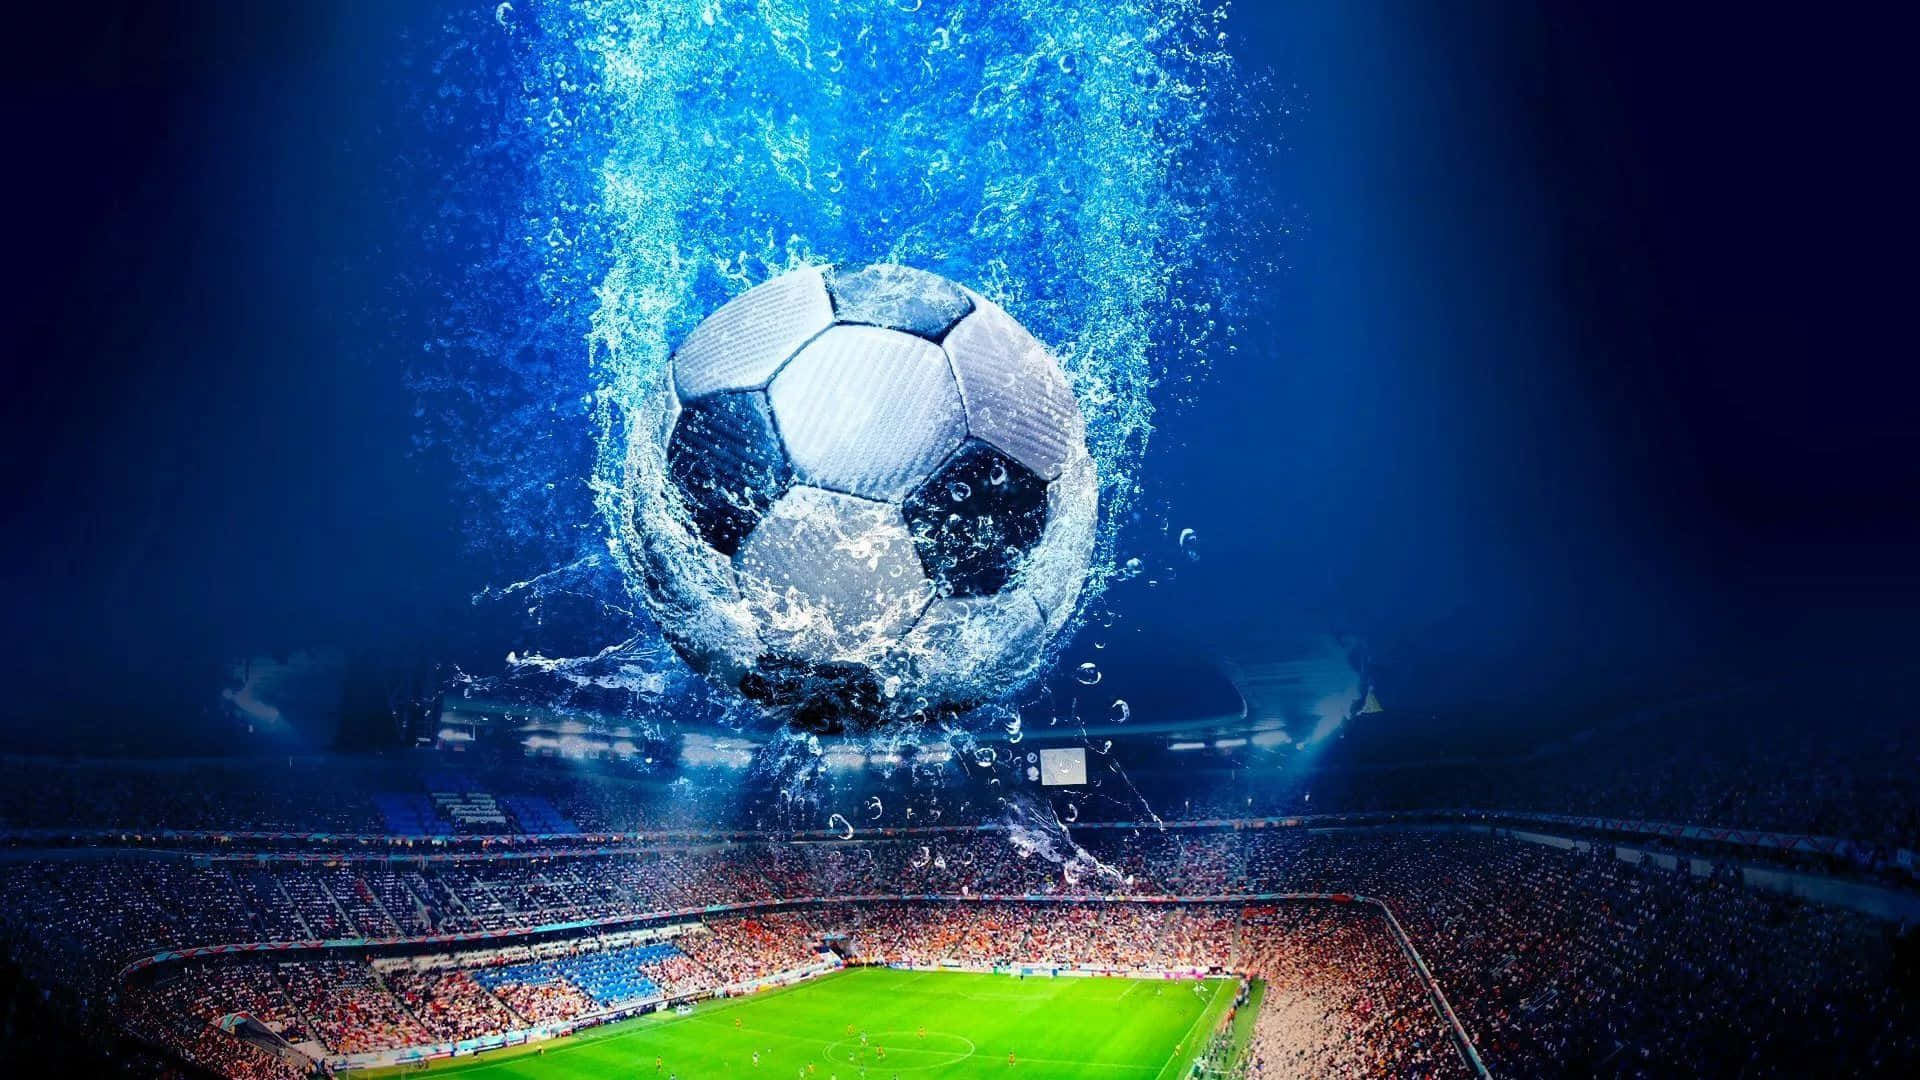 A Soccer Ball Reaches its Potential in the Spotlight of the Match